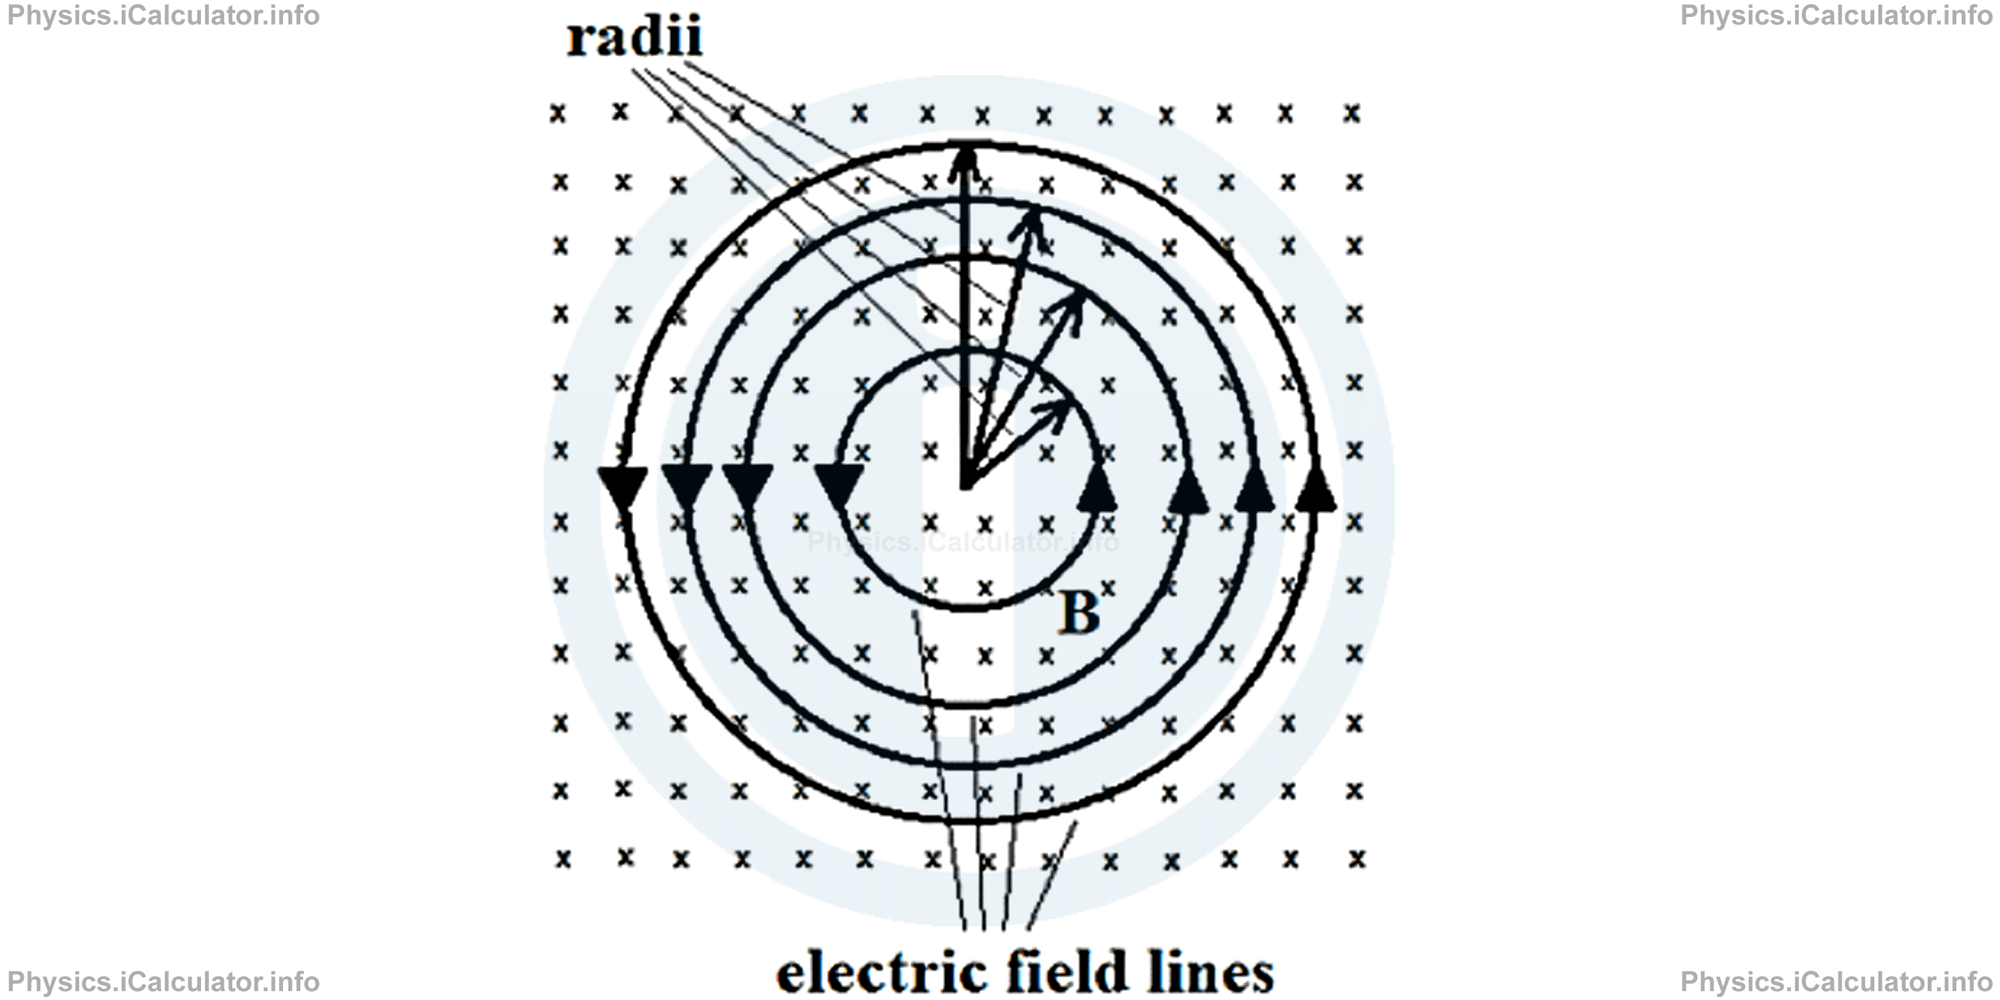 Physics Tutorials: This image provides visual information for the physics tutorial Induced Electric Fields 